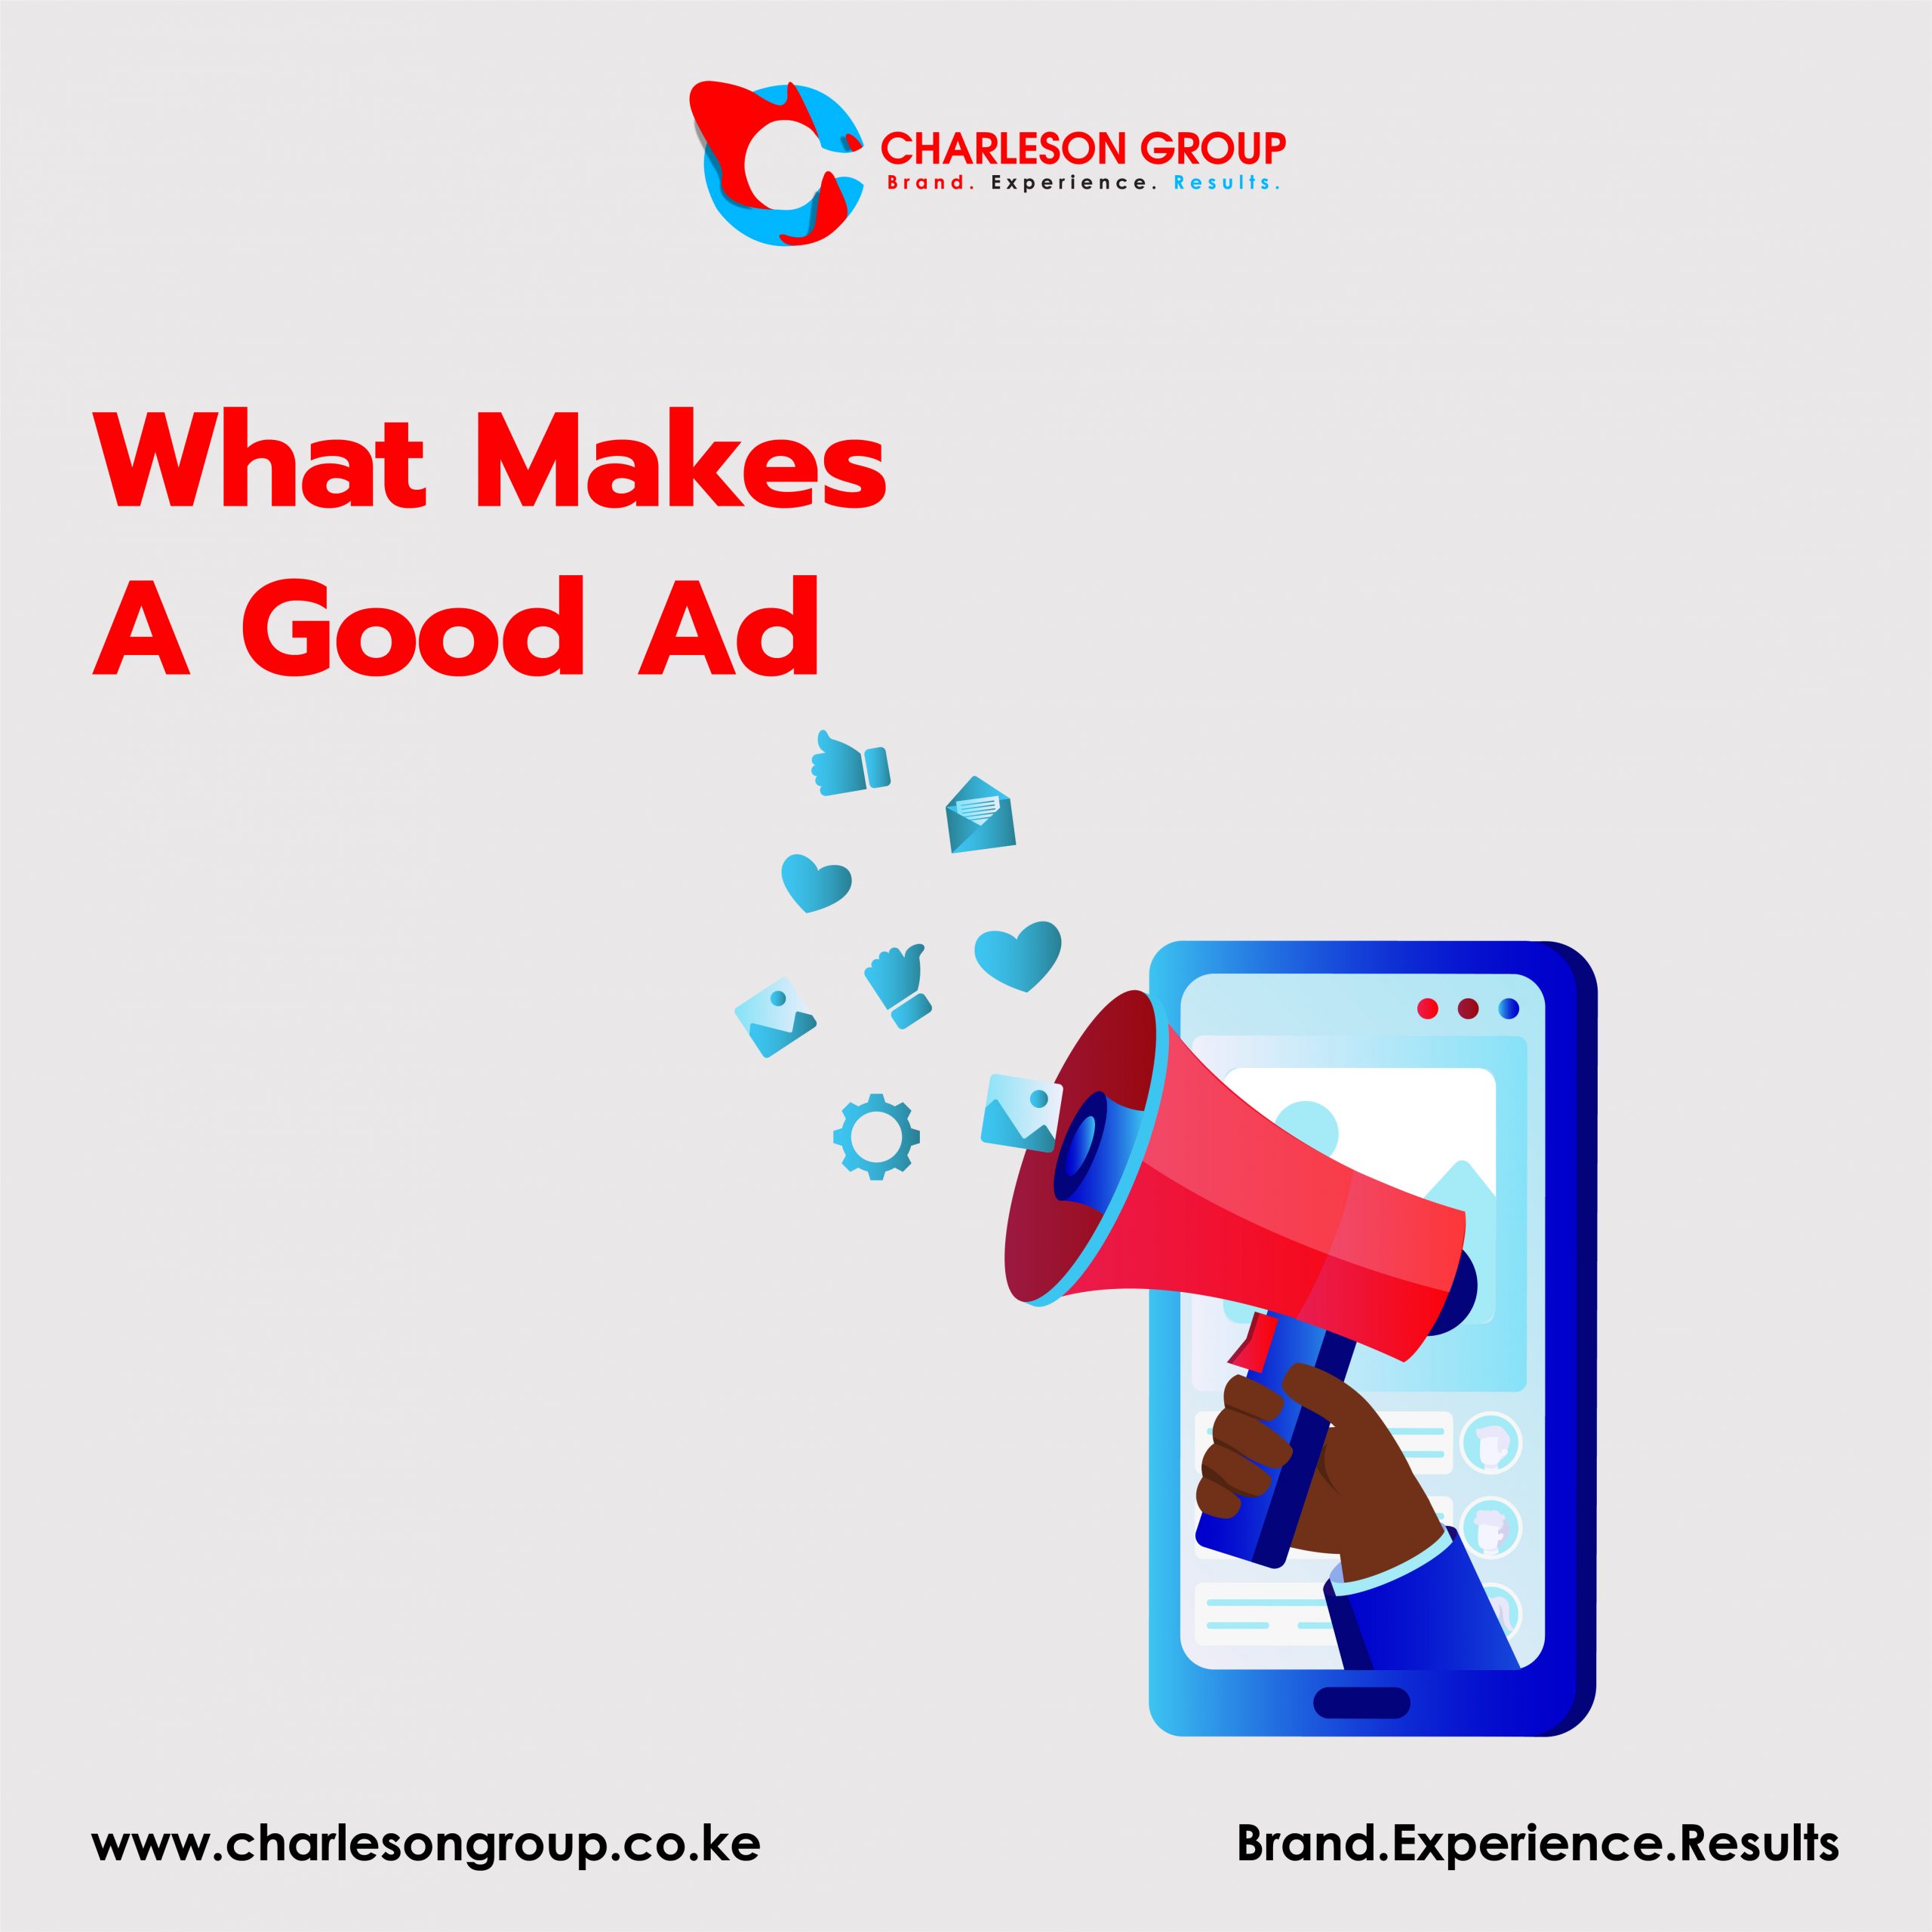 What Makes a Good Ad?